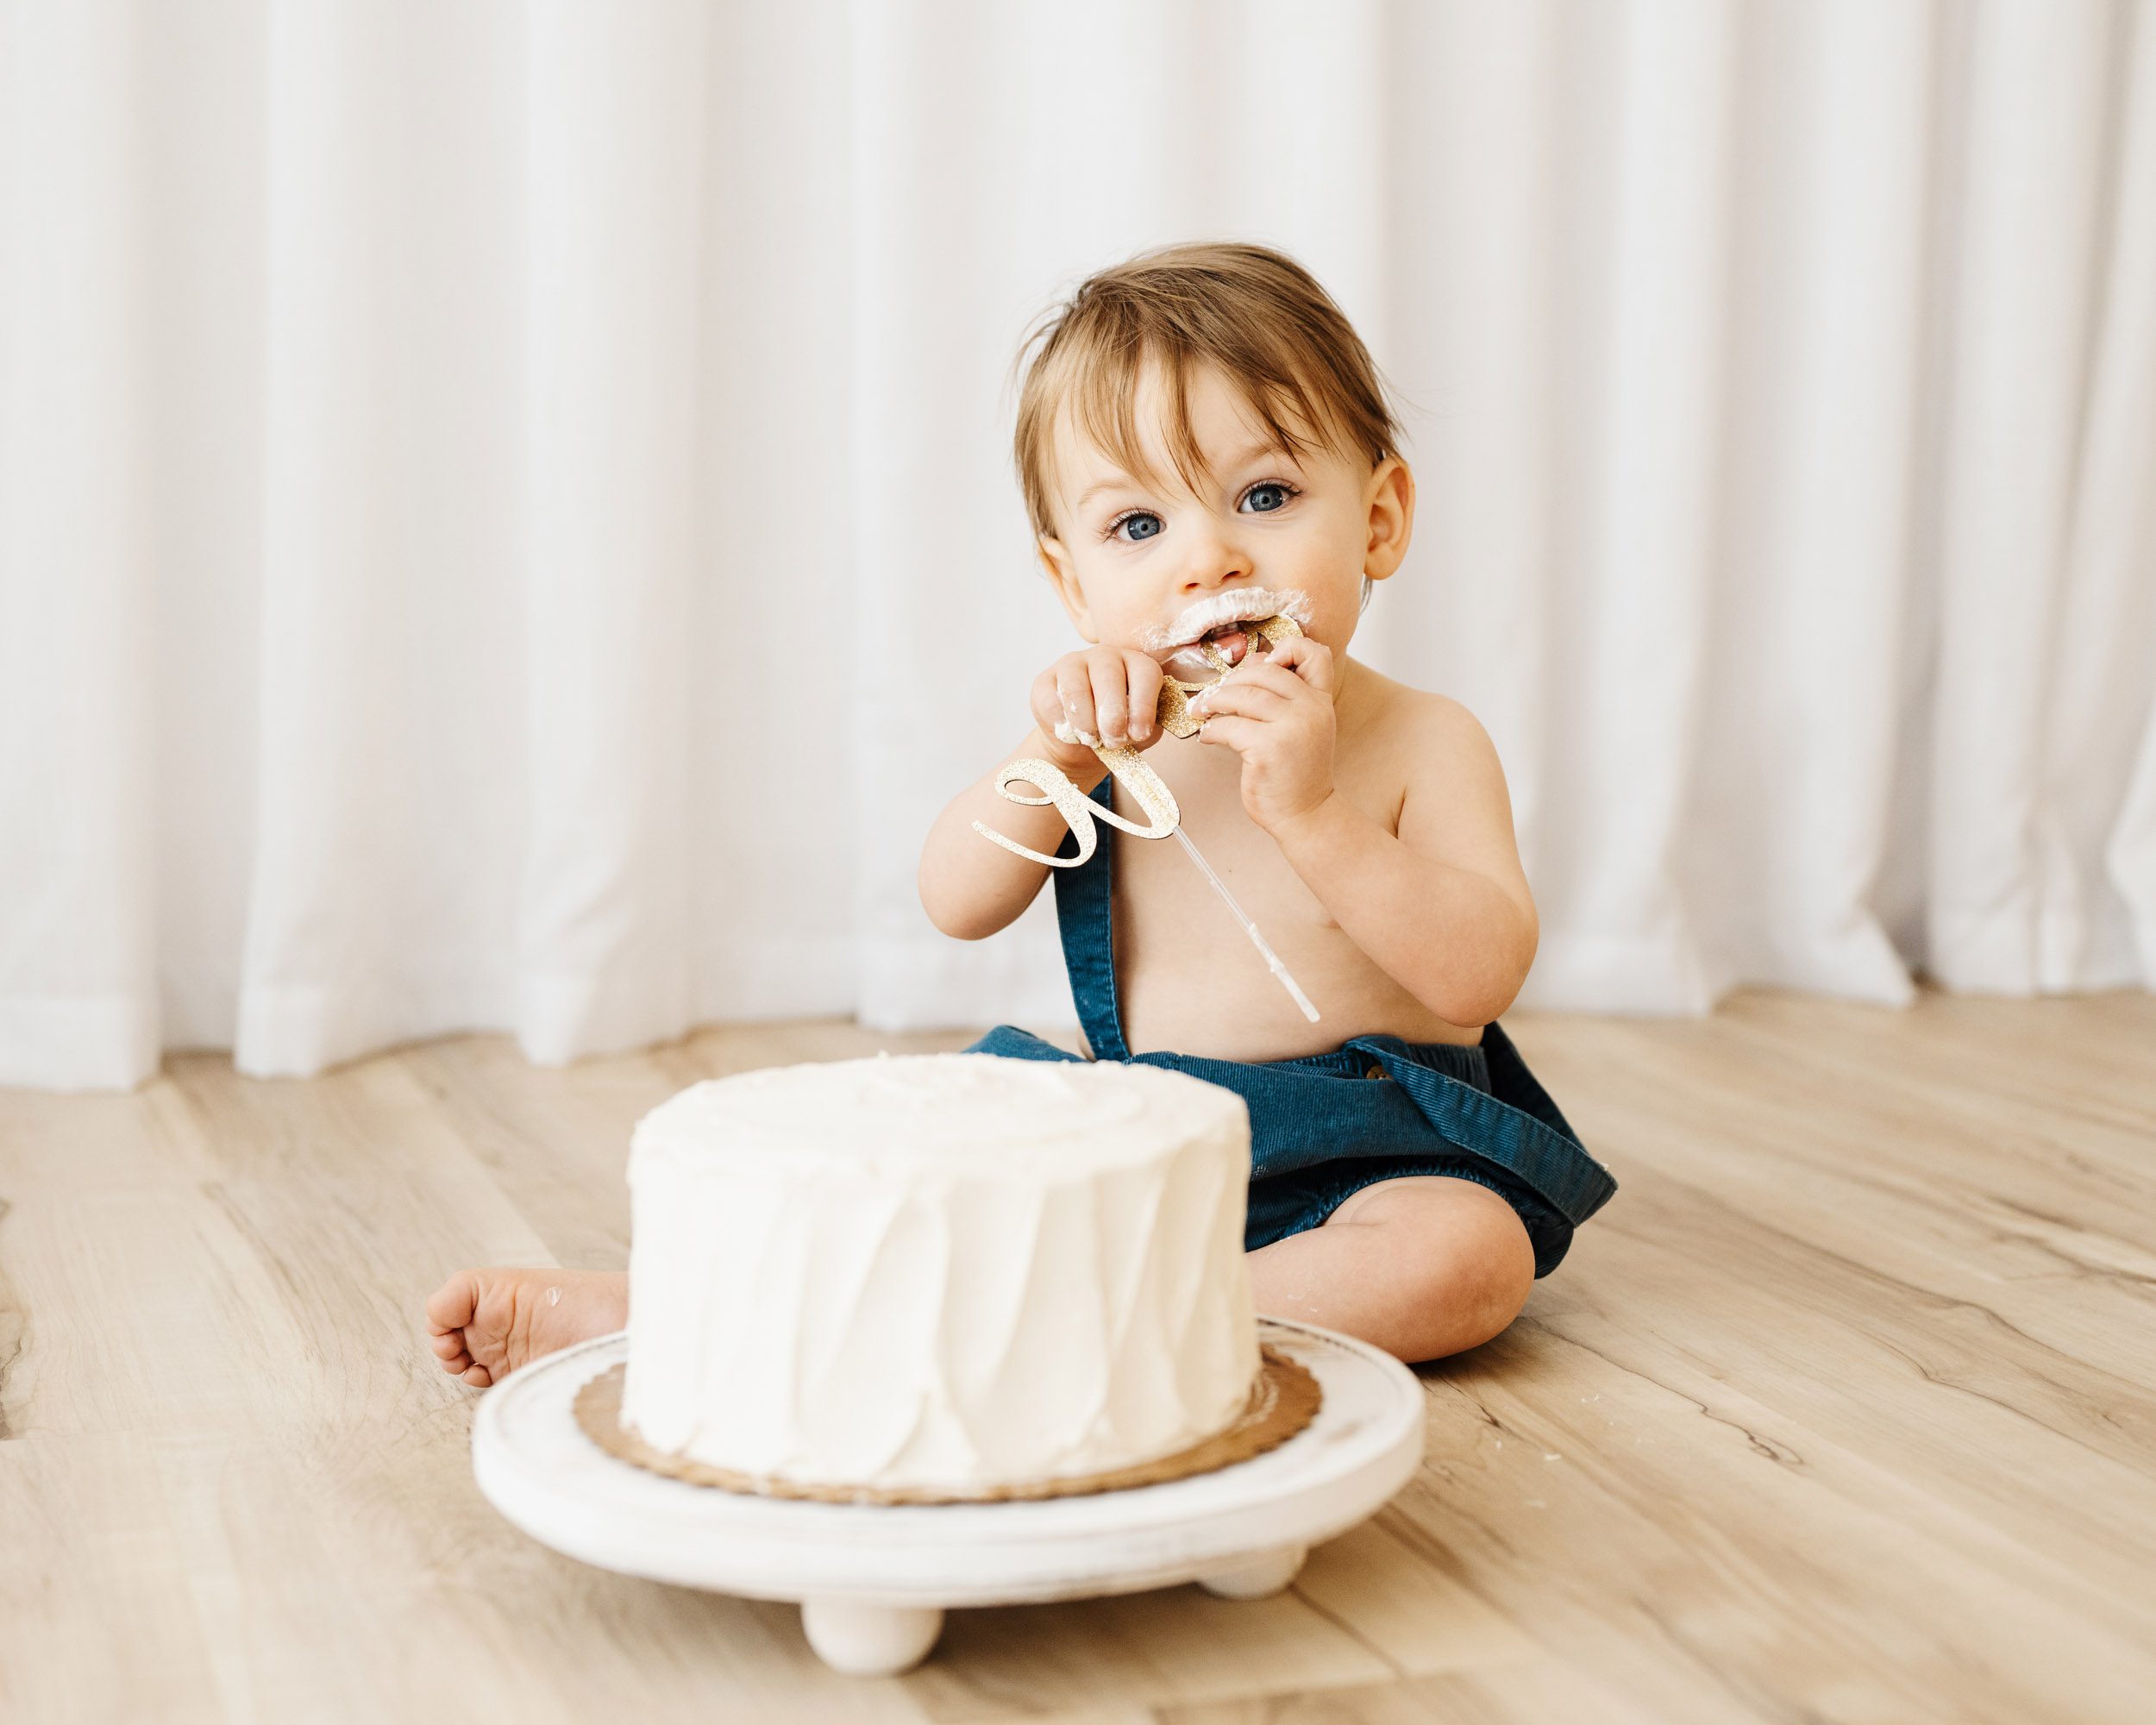 a young boy sitting on the floor next to a white cake as he chews on the cake topper decoration and looks directly at the camera during a 1st birthday cake smash & splash photoshoot